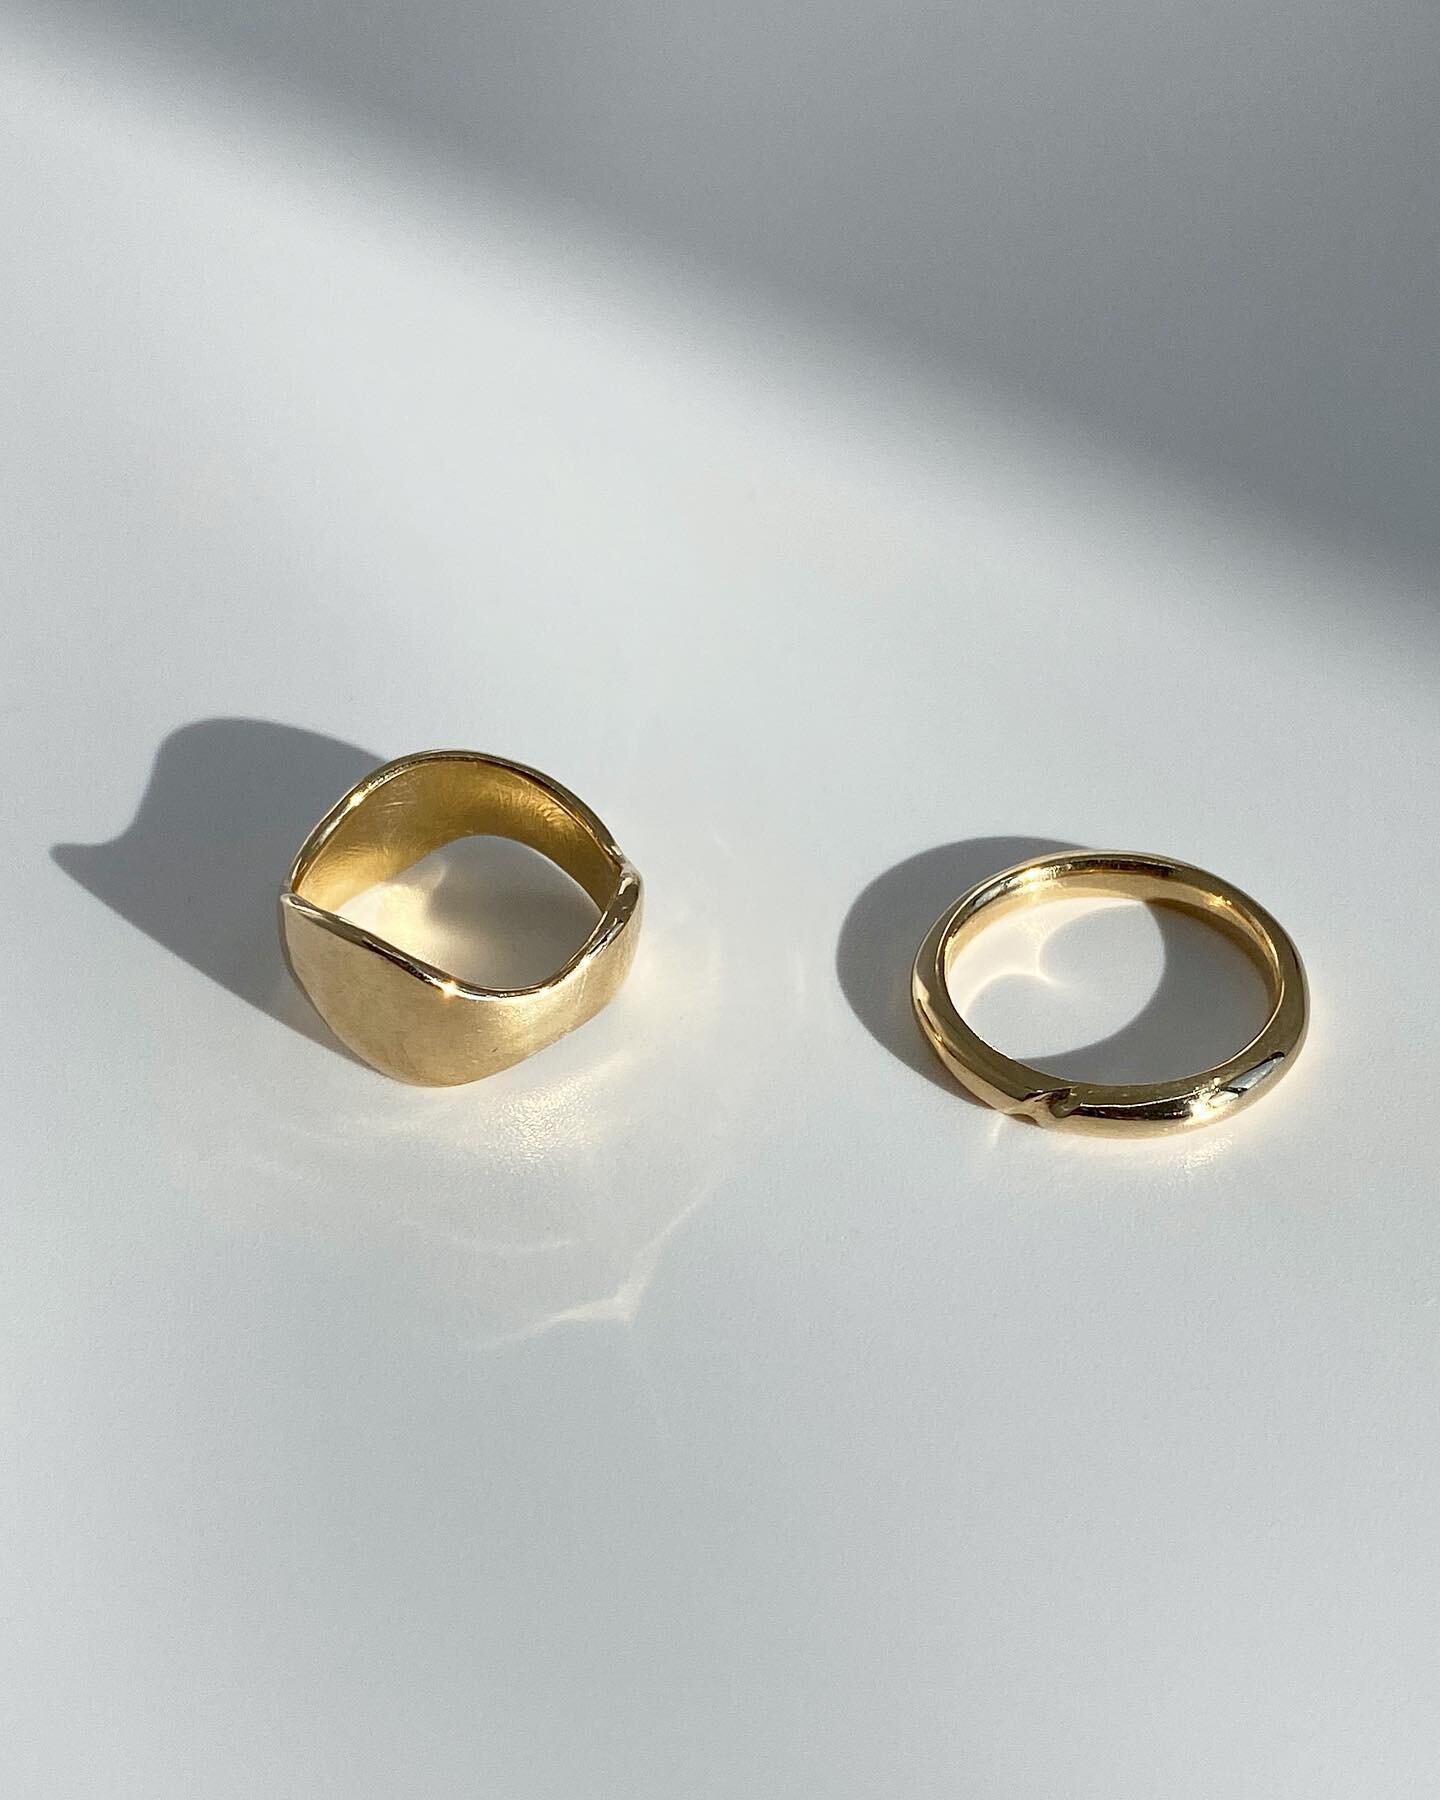 Introducing the Wave Ring and Notch Ring. Both hand carved and cast in recycled 14k Yellow Gold ✨✨✨ The Wave Ring is one of a kind and features an undulating design and subtle texture that I decided to leave on the inside, because I love it. The Notc